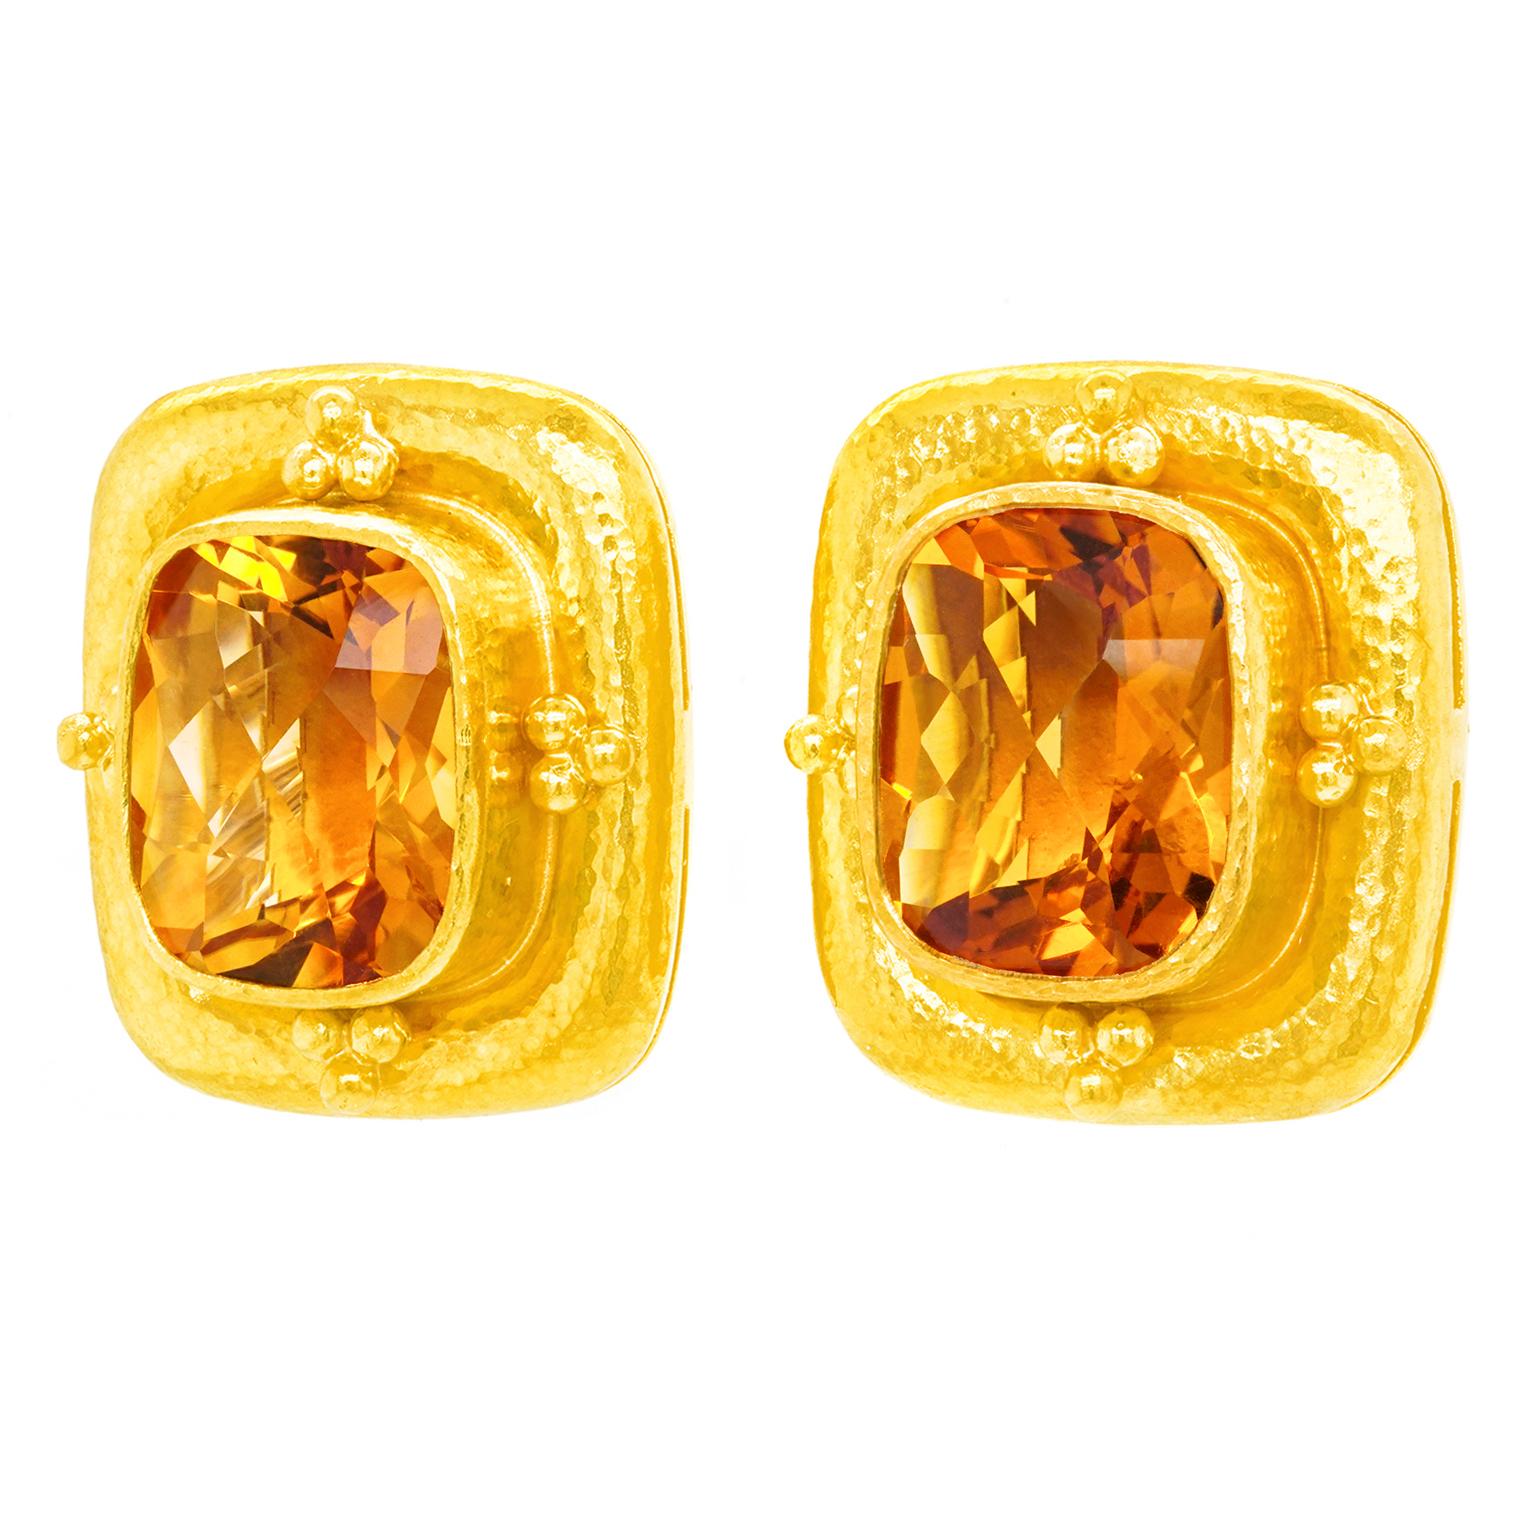 Circa 2000, 18k, by Elizabeth Locke, American.  Known for her Medieval and Renaissance revival motifs, Elizabeth Locke's jewelry is superbly made and timelessly stylish. These gorgeous earrings feature nine carats of rich citrine. The look is